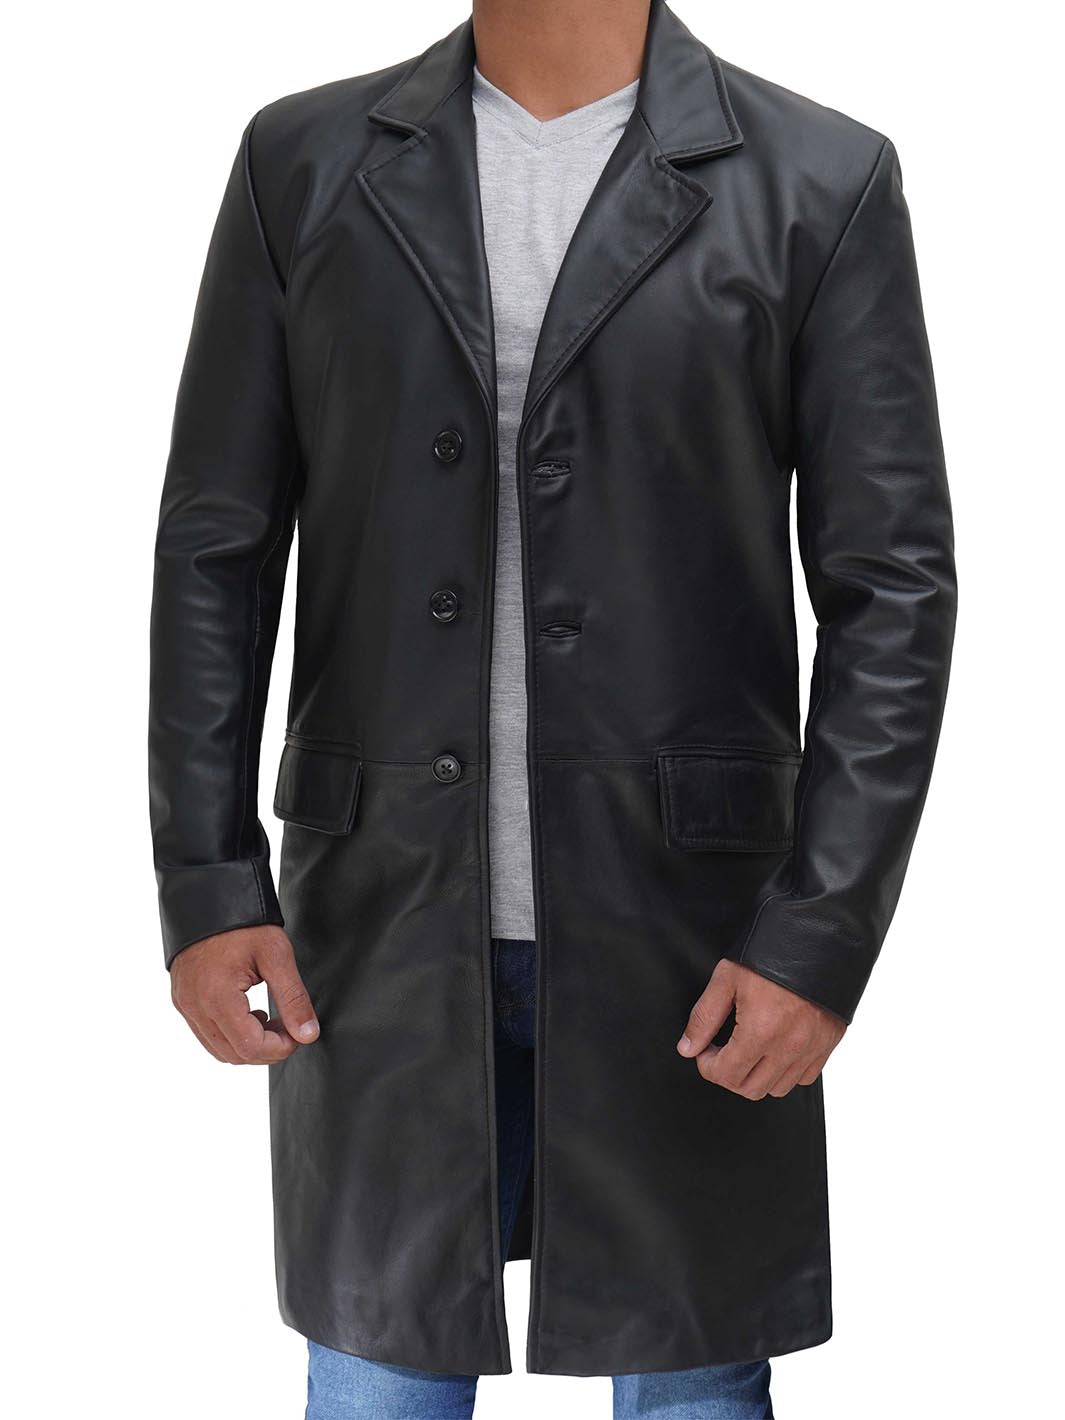 Mens Classic Black Cowhide Leather Trench Coat